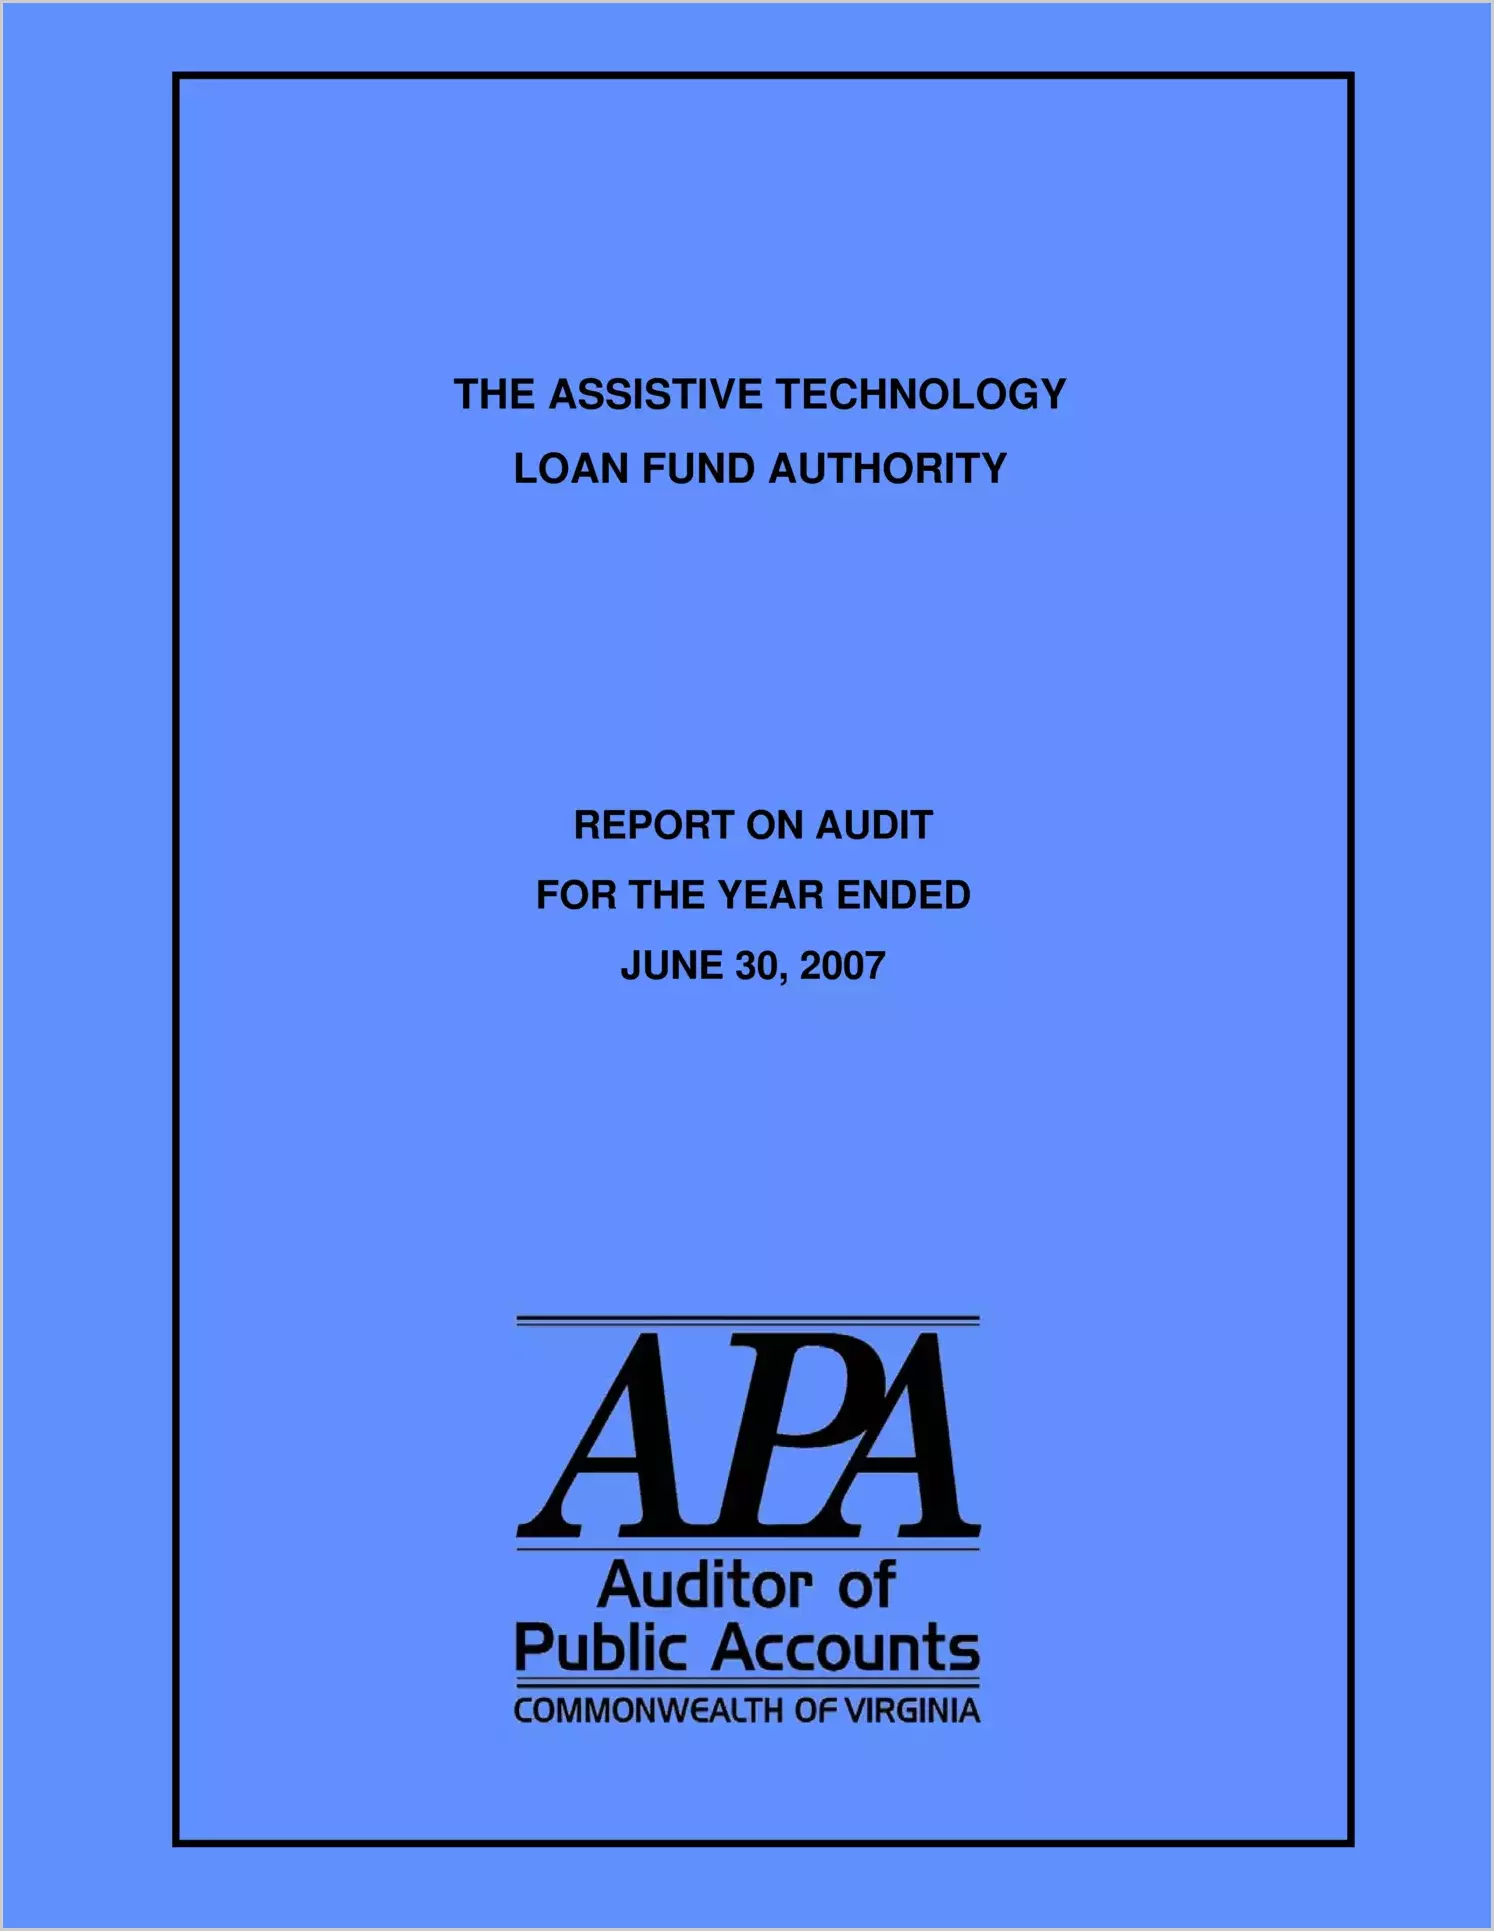 The Assistive Technology Loan Fund Authority report on audit for the year ended June 30, 2007